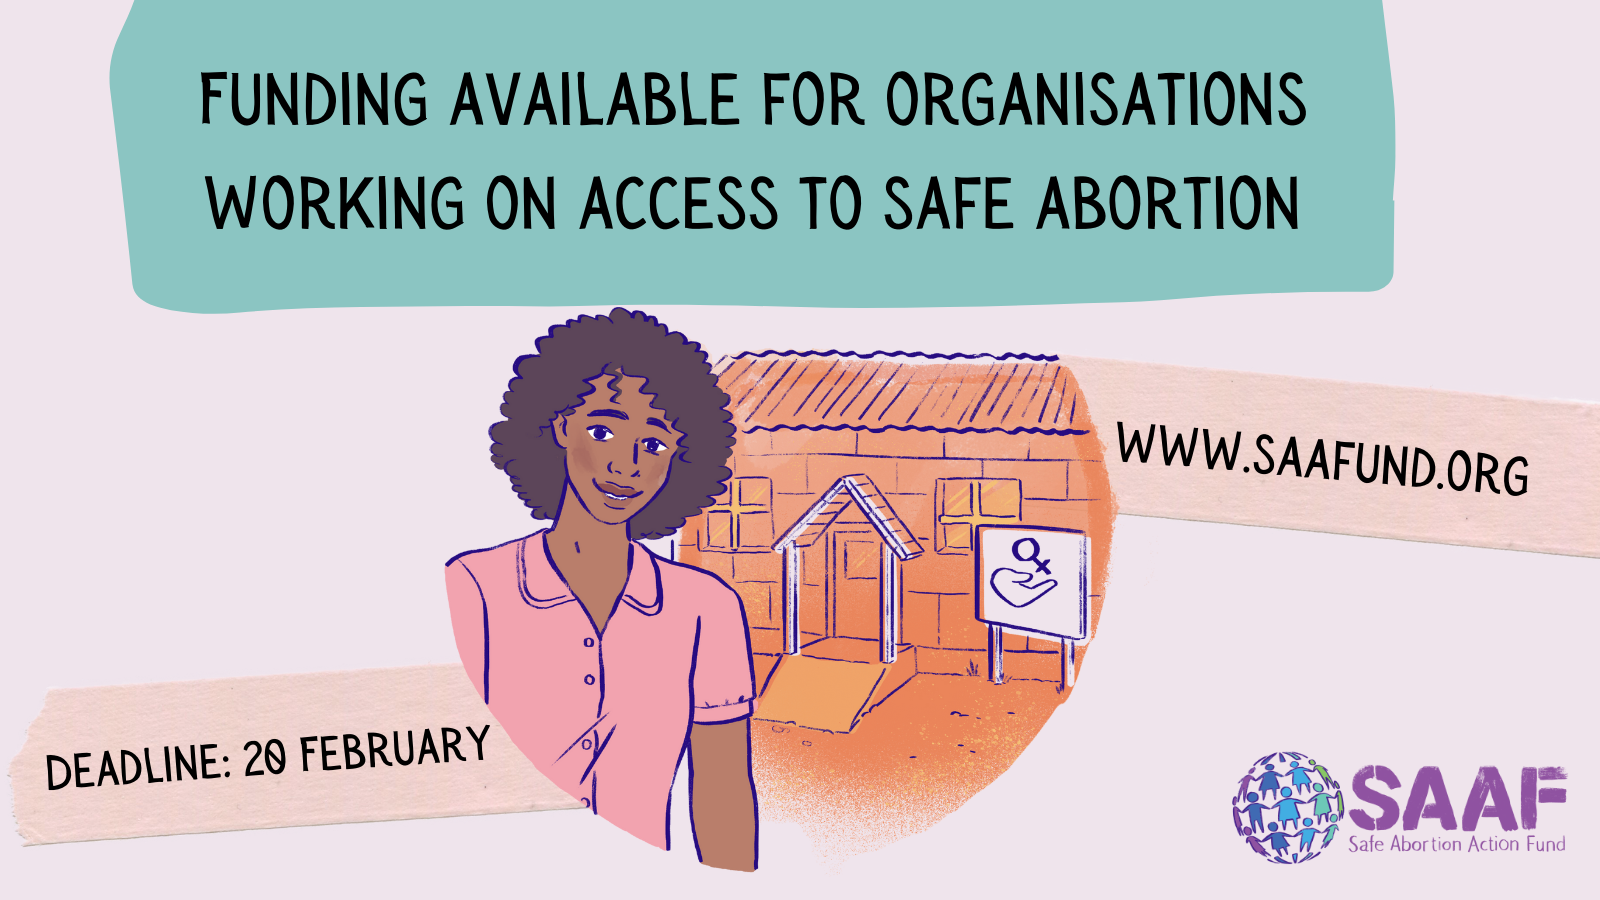 SAAF Funding 2022 for Organizations working on Access to Safe Abortion